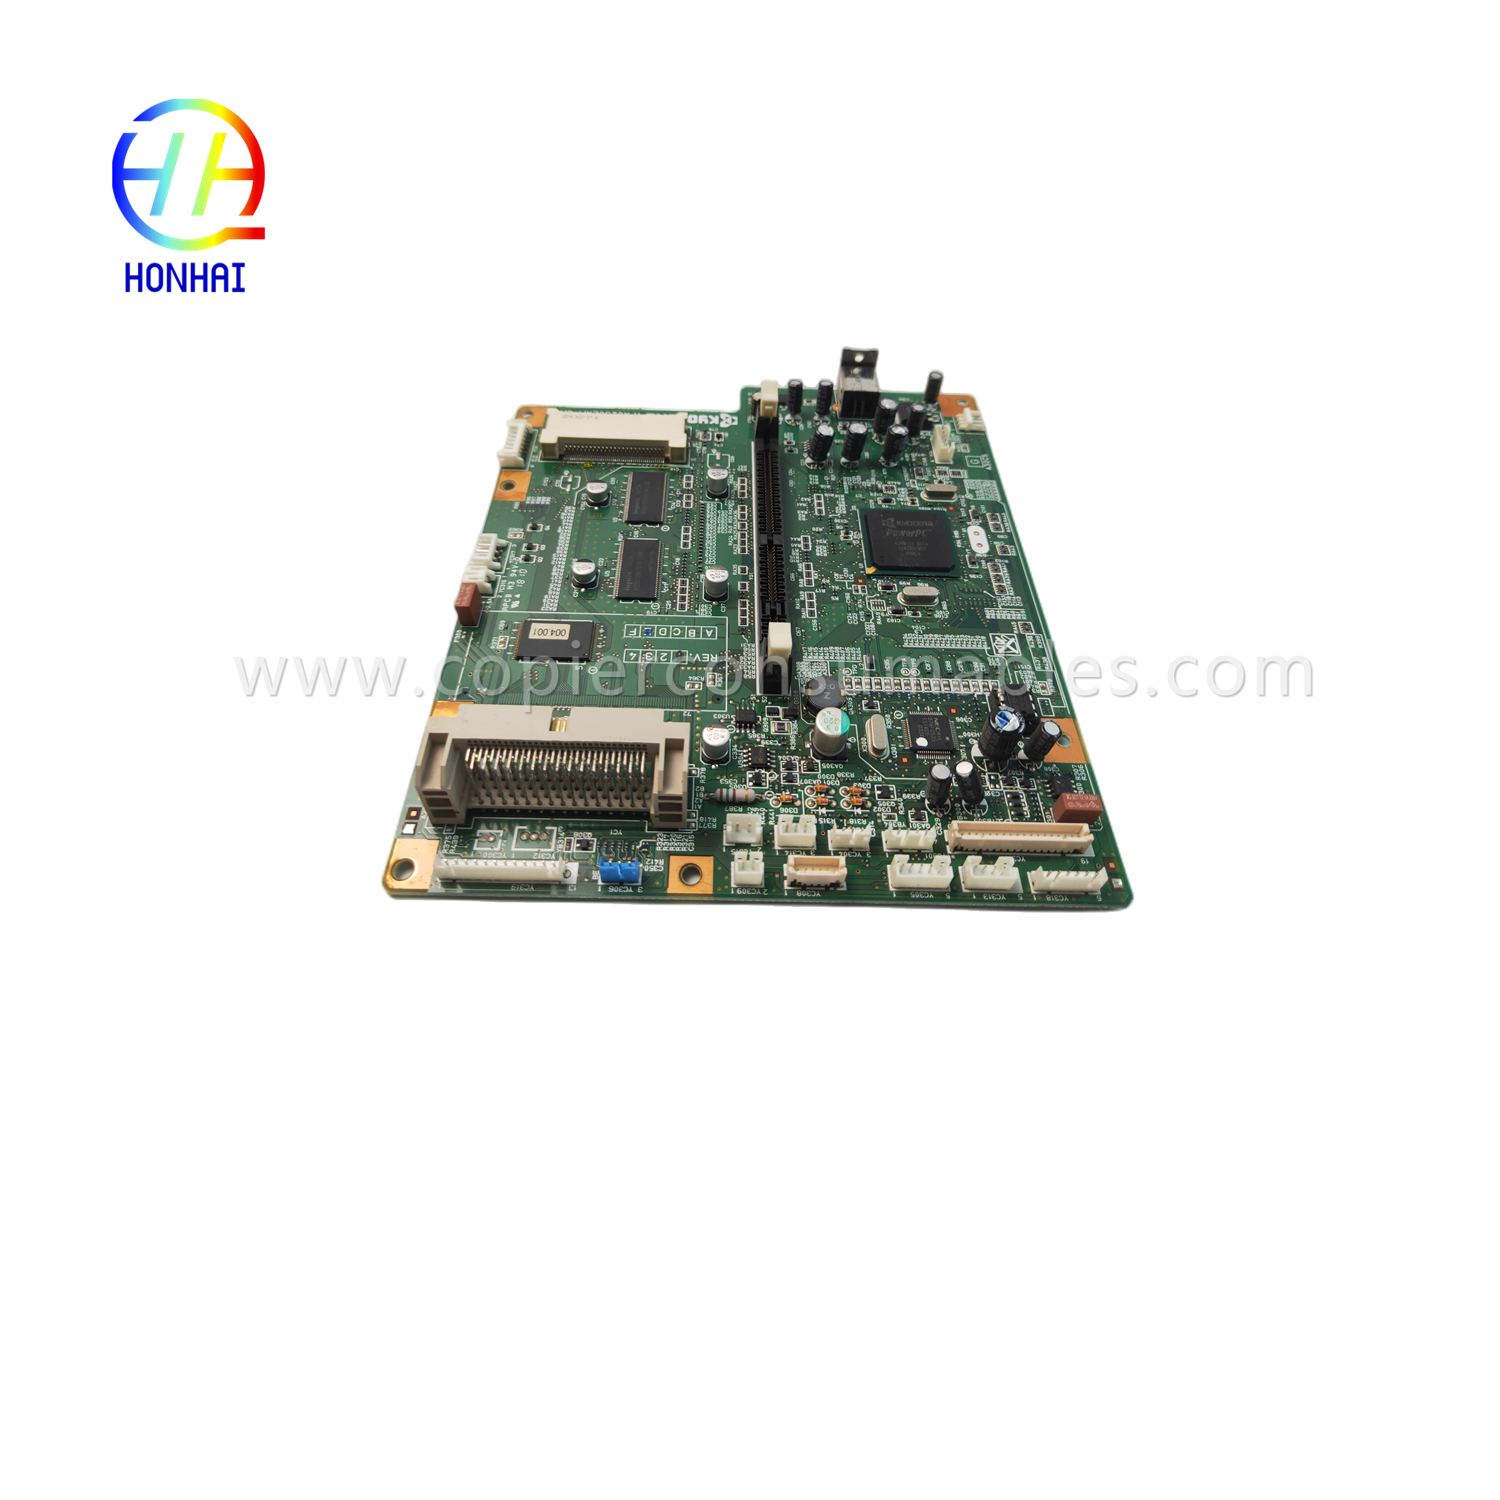 https://www.copierconsumables.com/mainboard-for-kyocera-fs-1300d-1300dn-7pa0230emgh01-formatter-board-product/